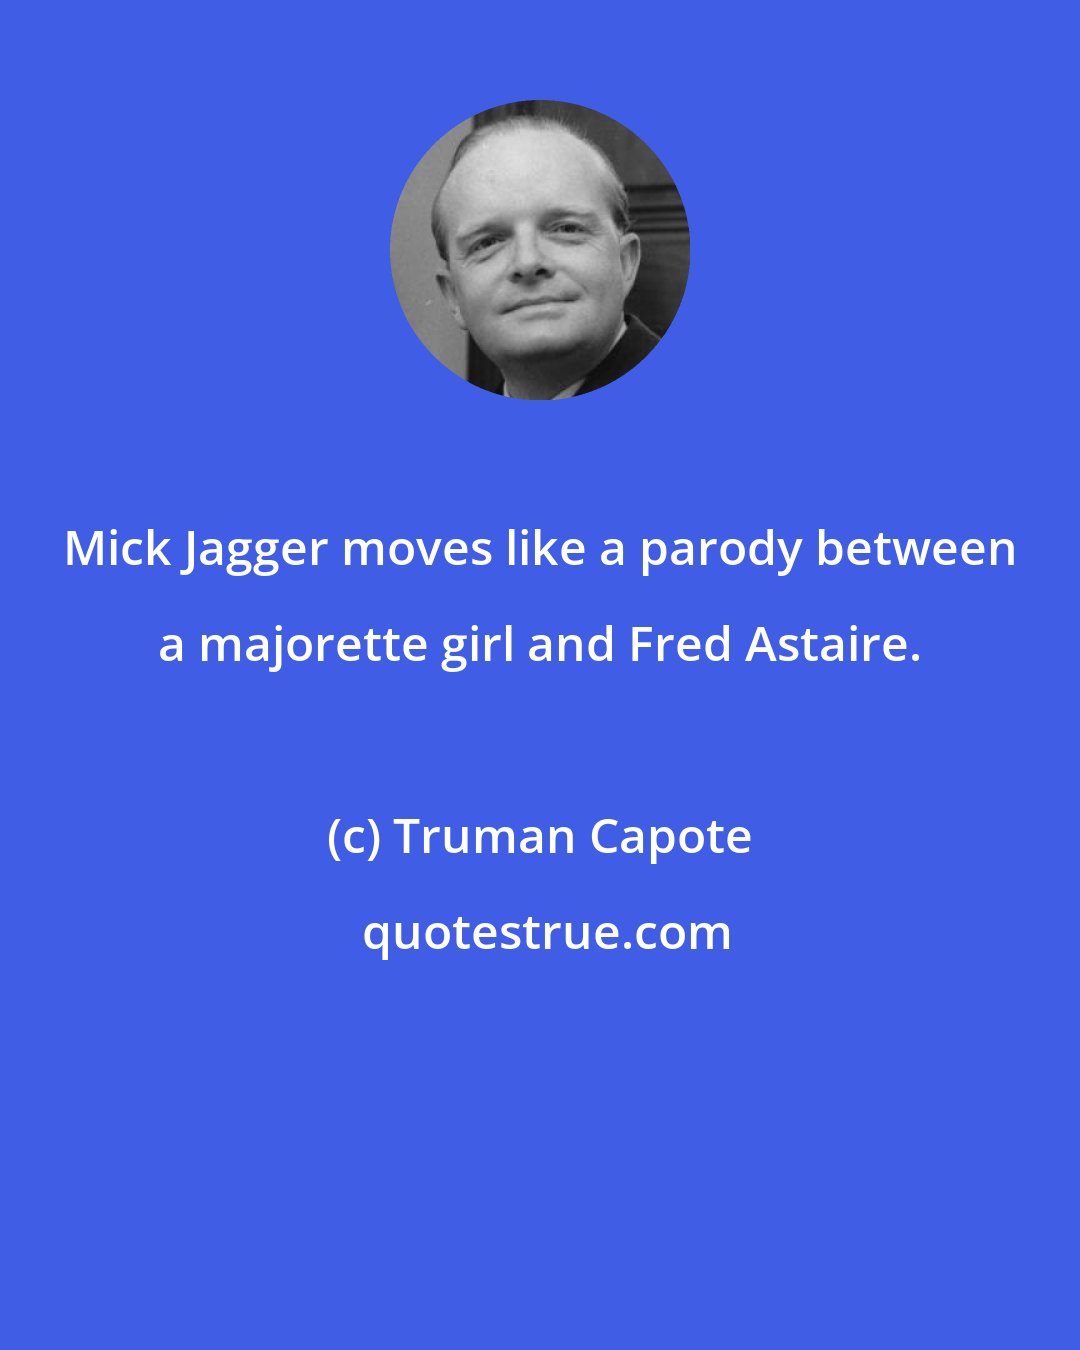 Truman Capote: Mick Jagger moves like a parody between a majorette girl and Fred Astaire.